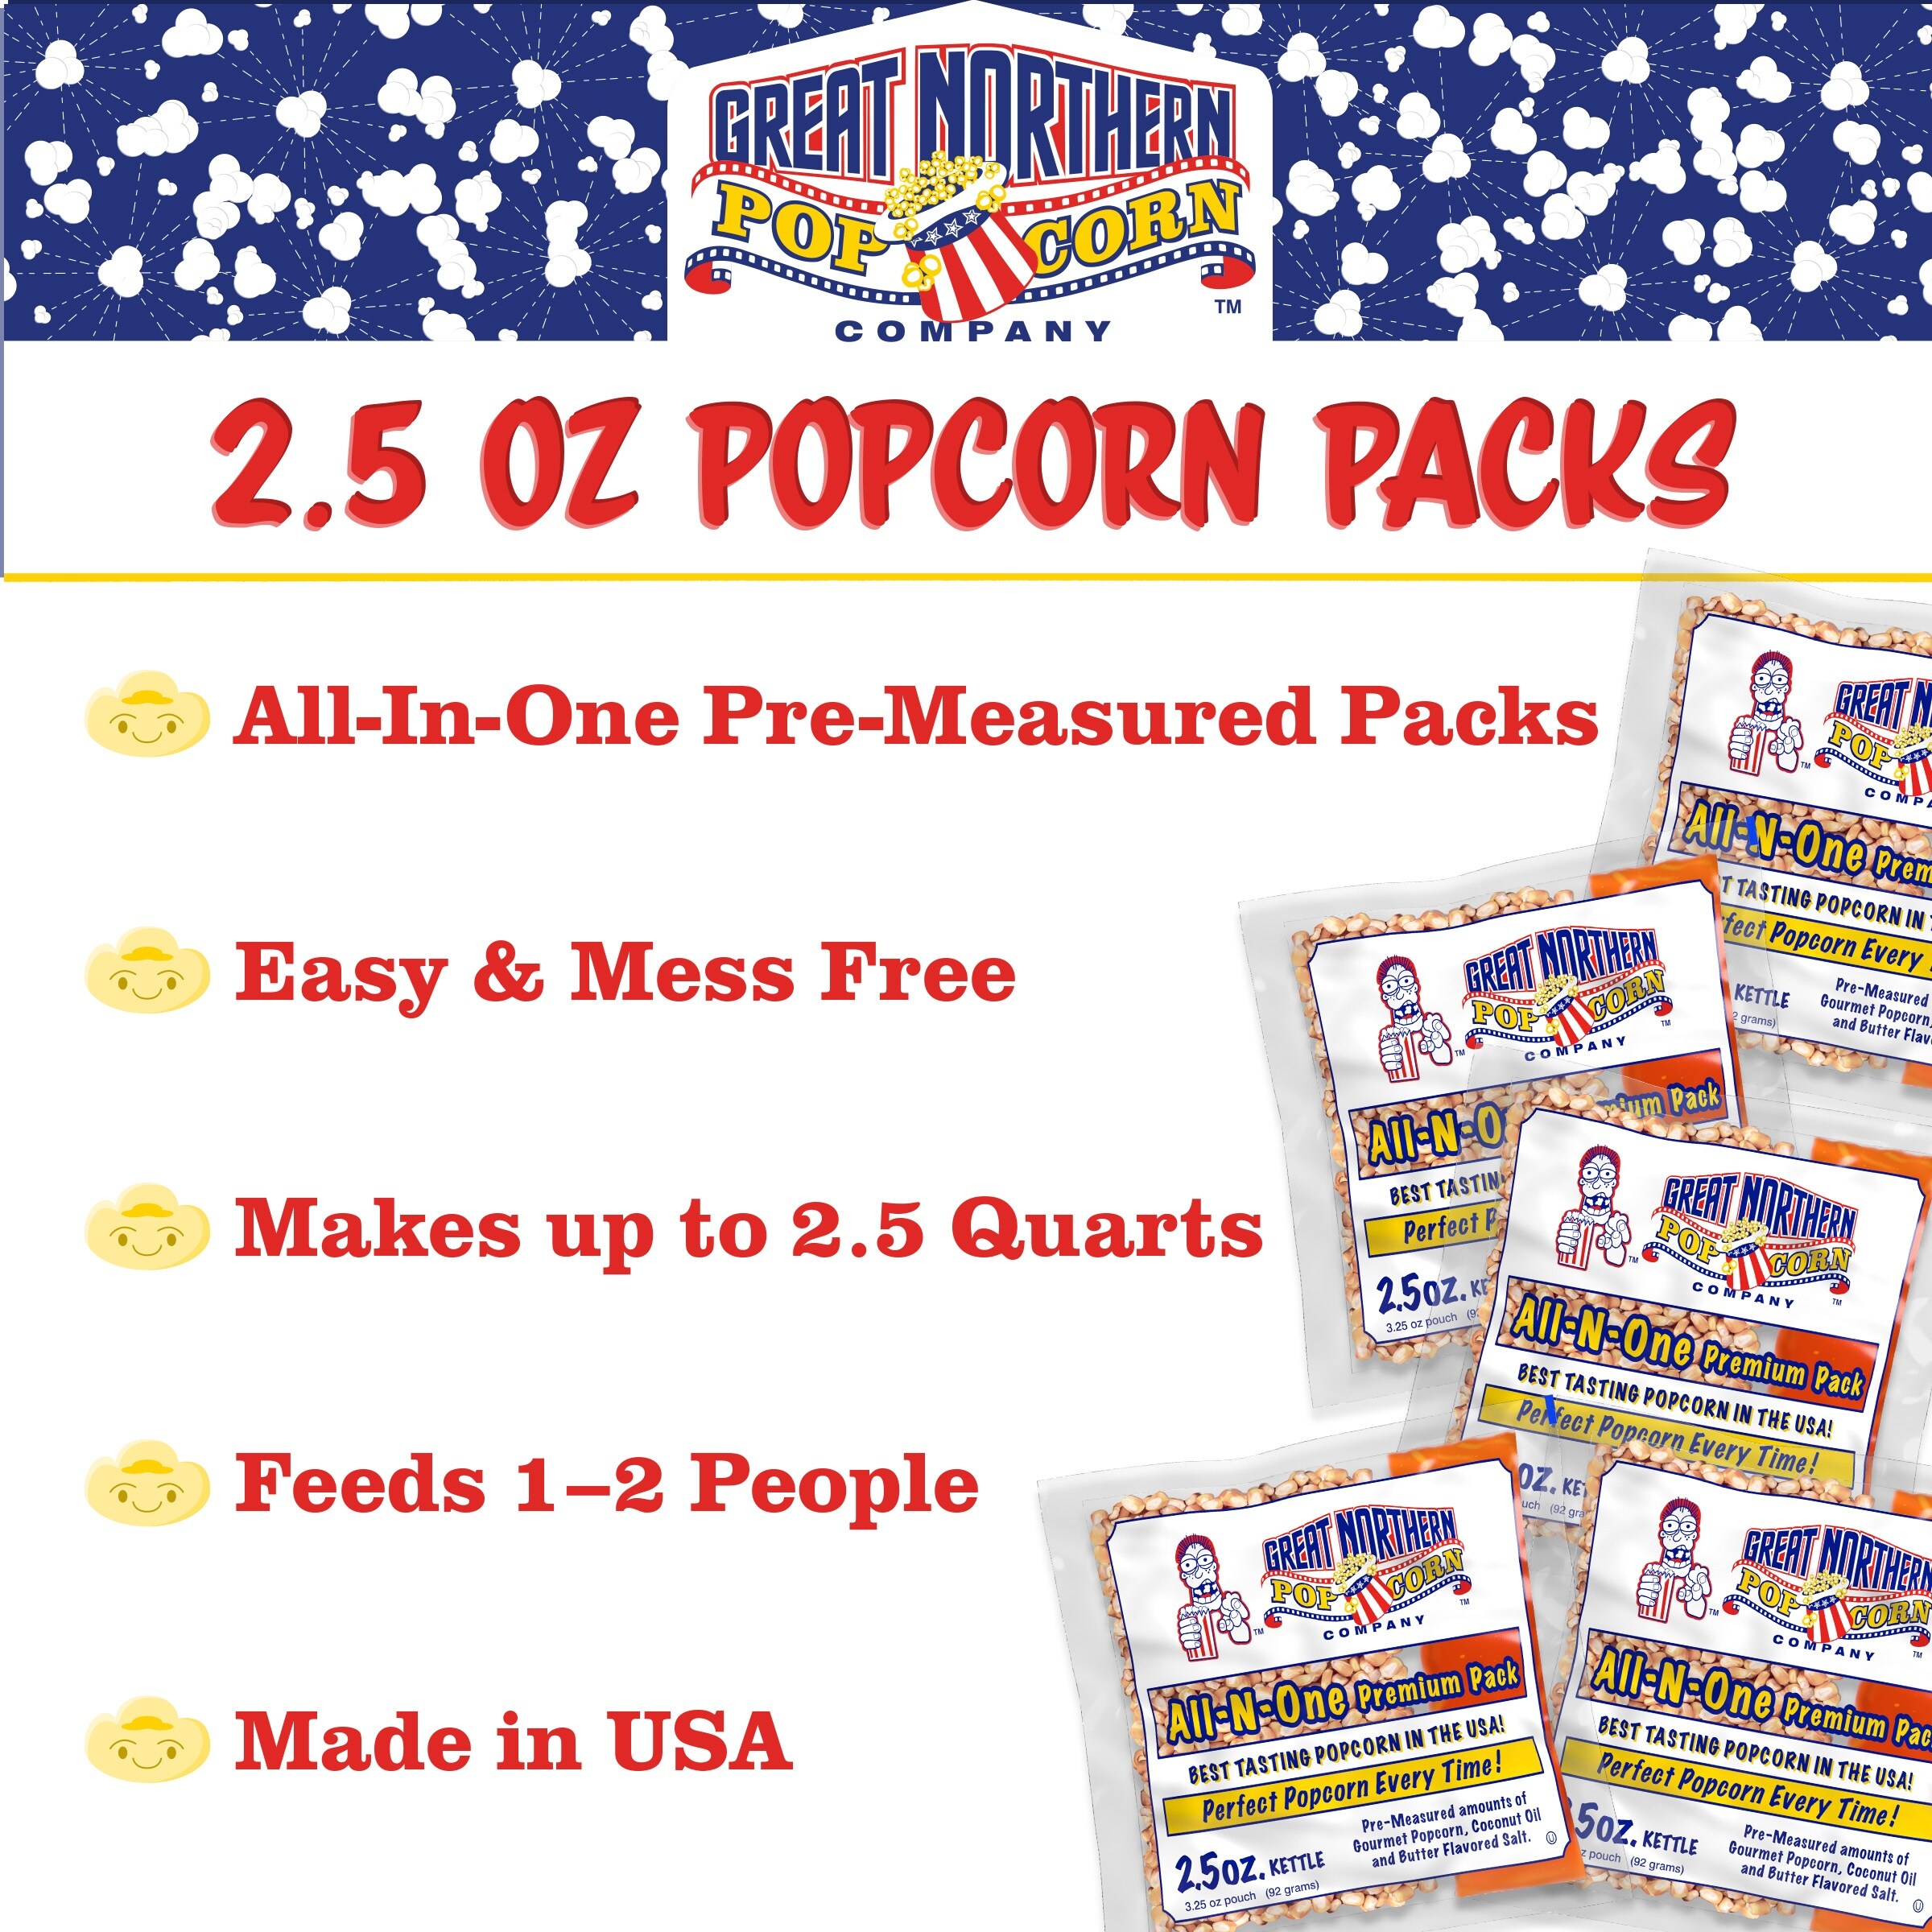 https://ak1.ostkcdn.com/images/products/is/images/direct/7a78248040fc0dbbfd40da76a2399b13651fc2ef/Little-Bambino-Popcorn-Machine-with-12-Pack-of-All-In-One-Popcorn-Kernel-Packets-by-Great-Northern-Popcorn-%28Black%29.jpg